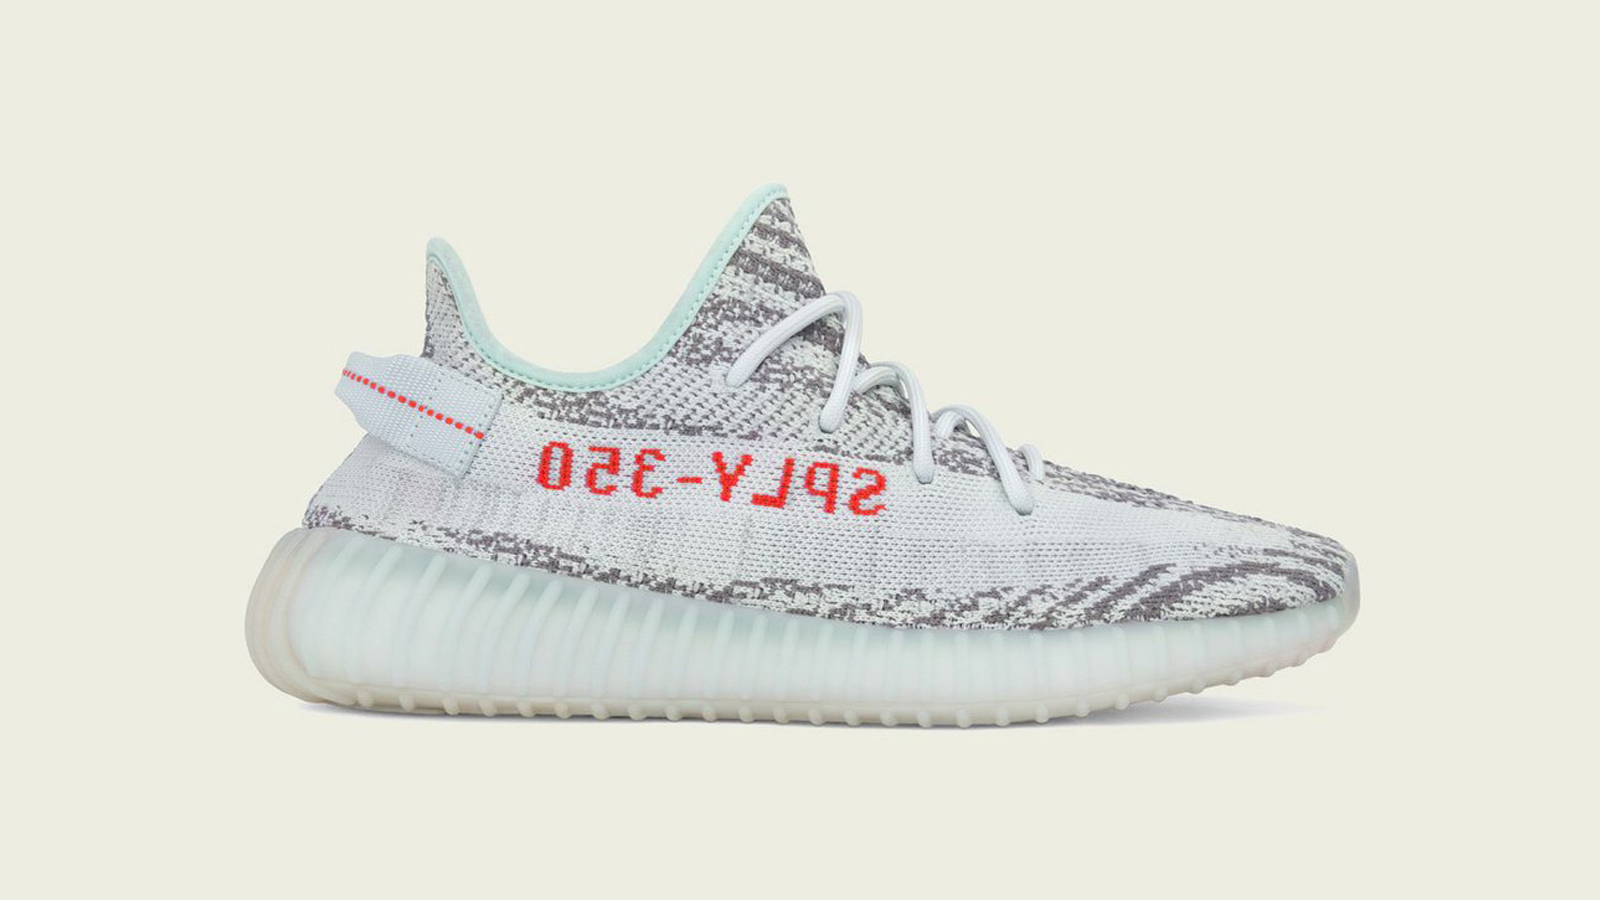 adidas-Yeezy-Boost-350-V2-Blue-Tint-Official-Images-1